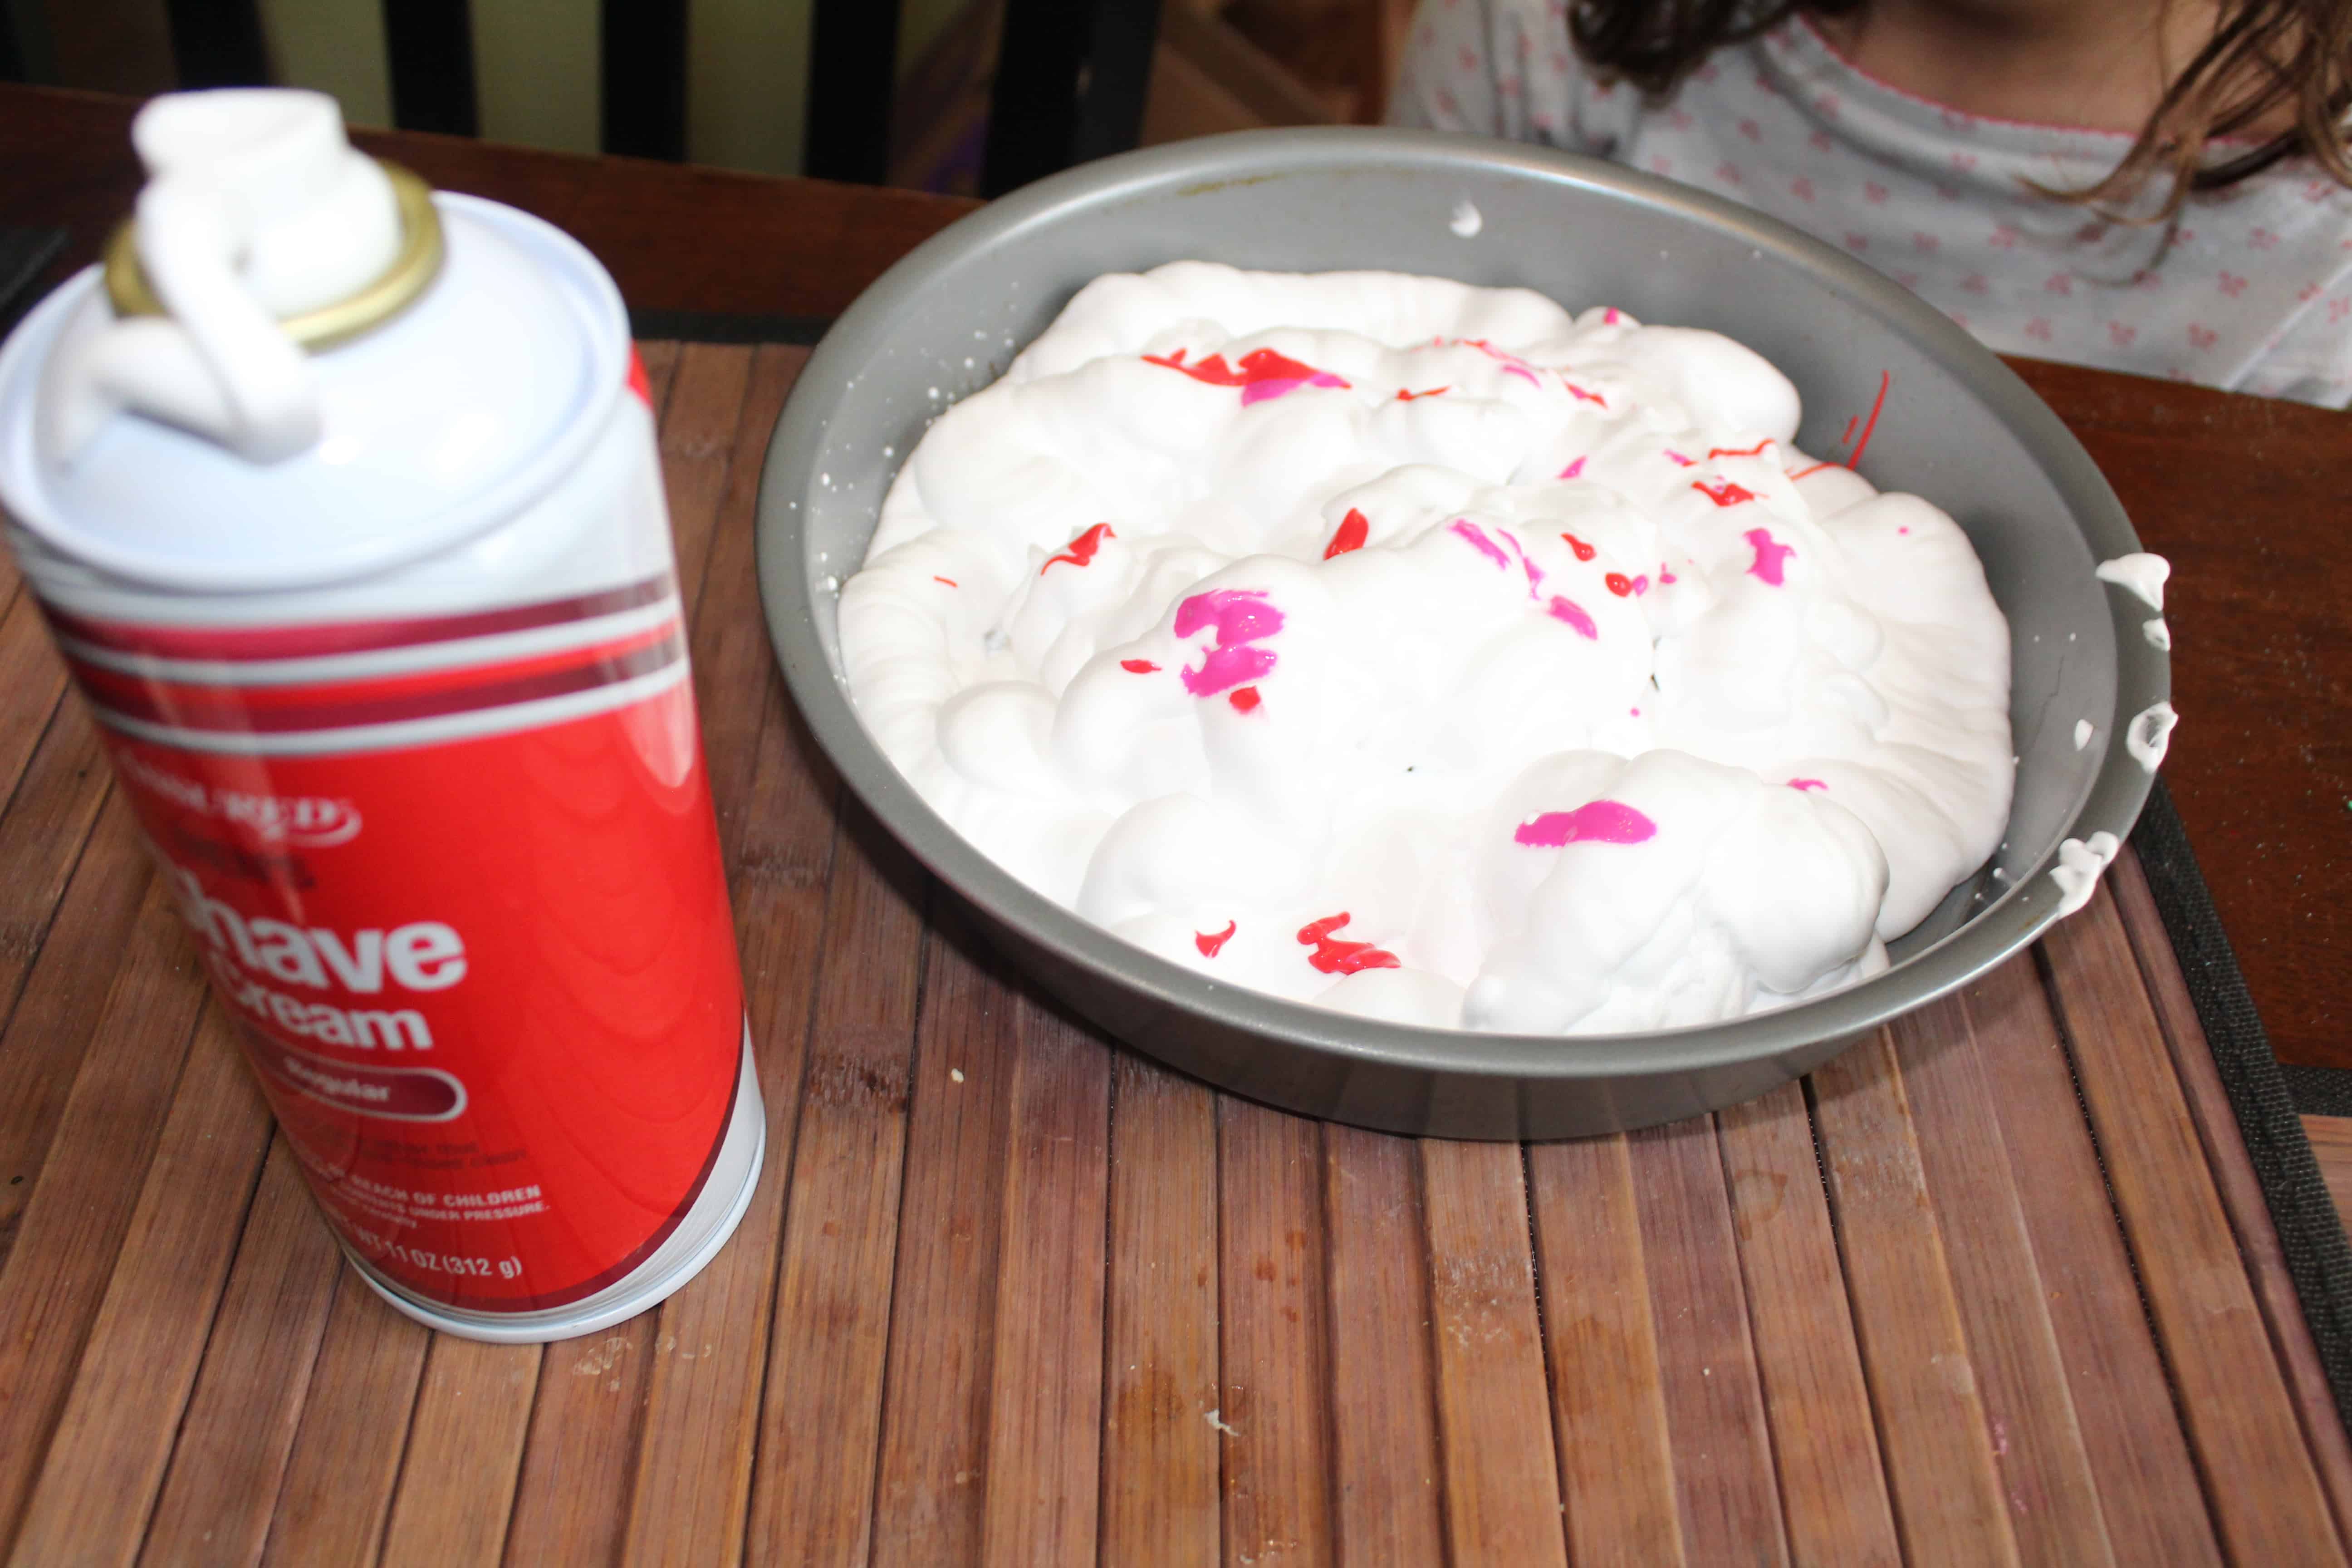 shaving cream with paint added